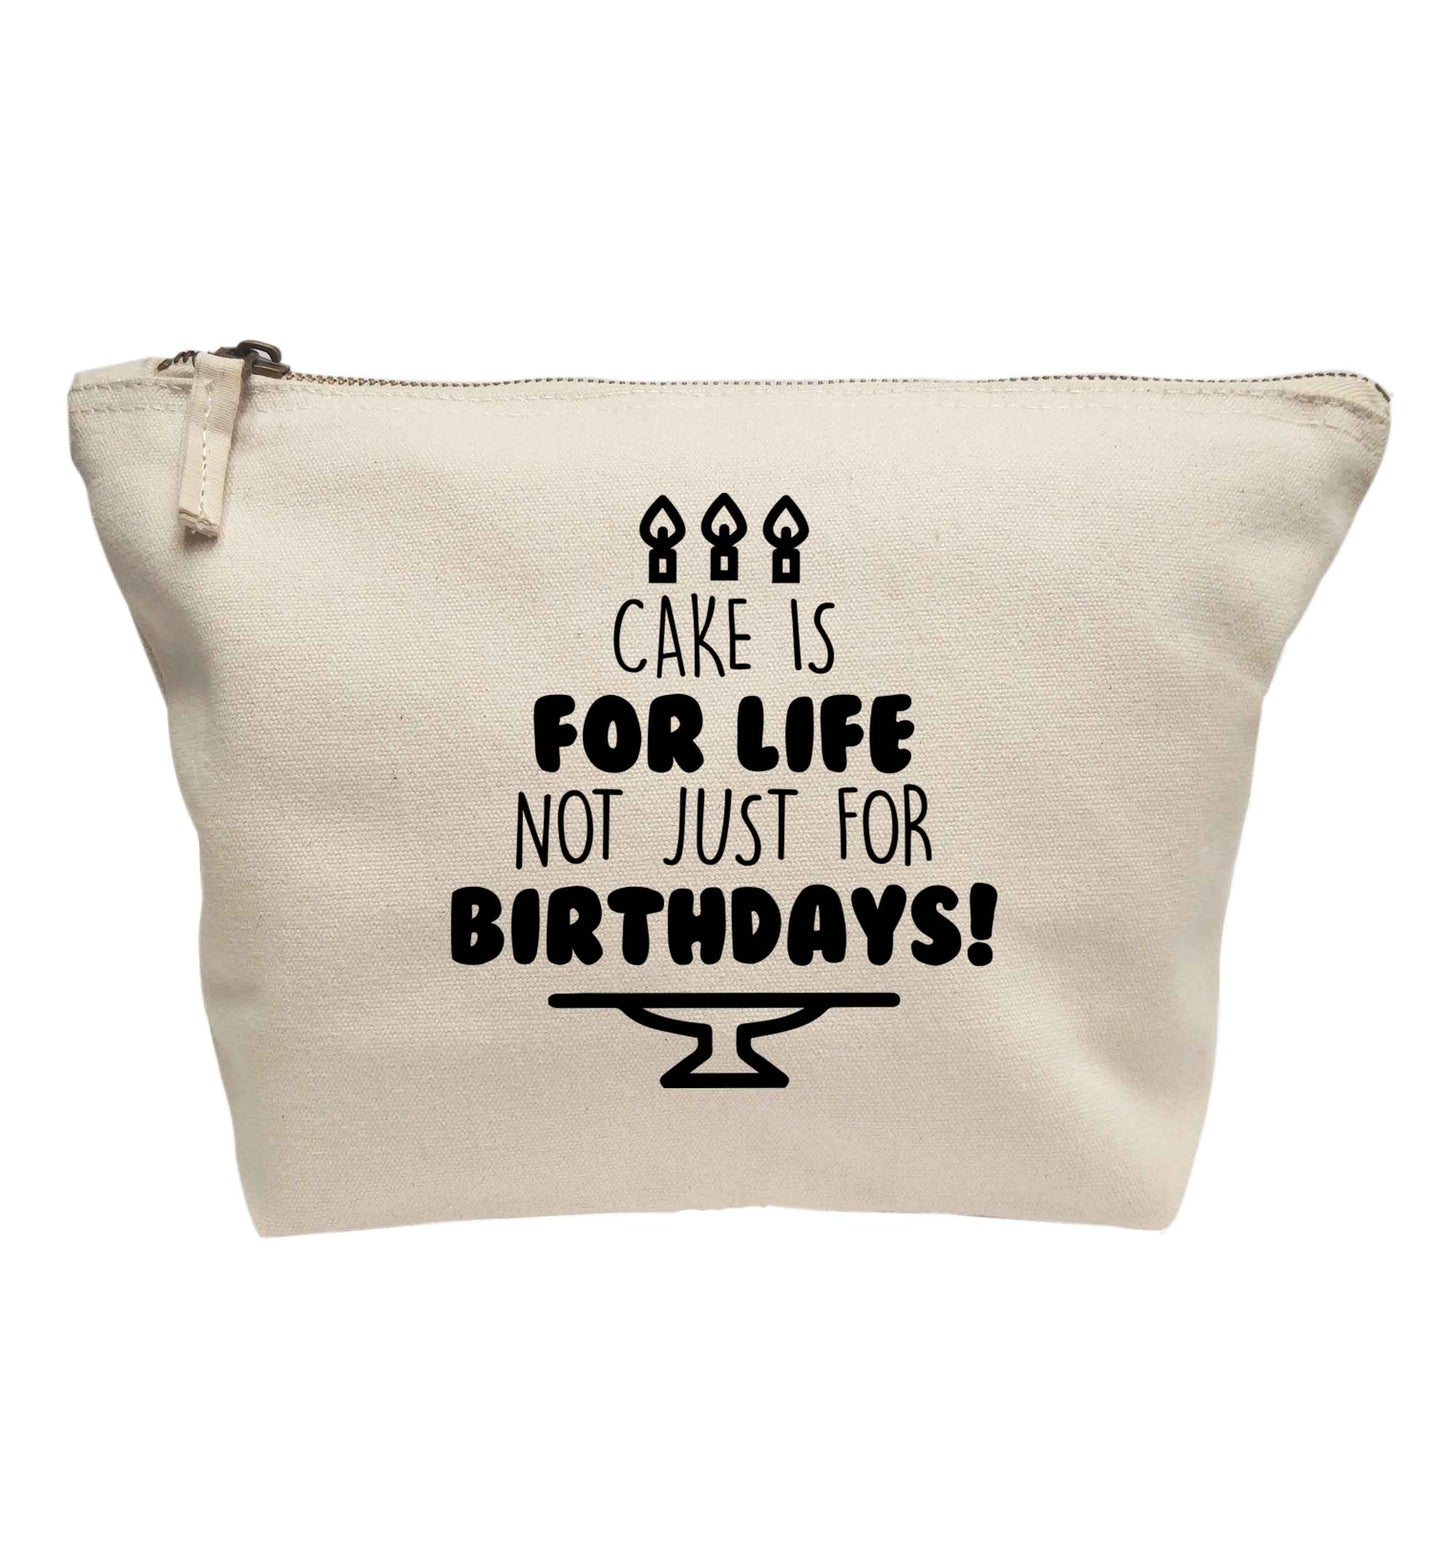 Cake is for life not just for birthdays | makeup / wash bag